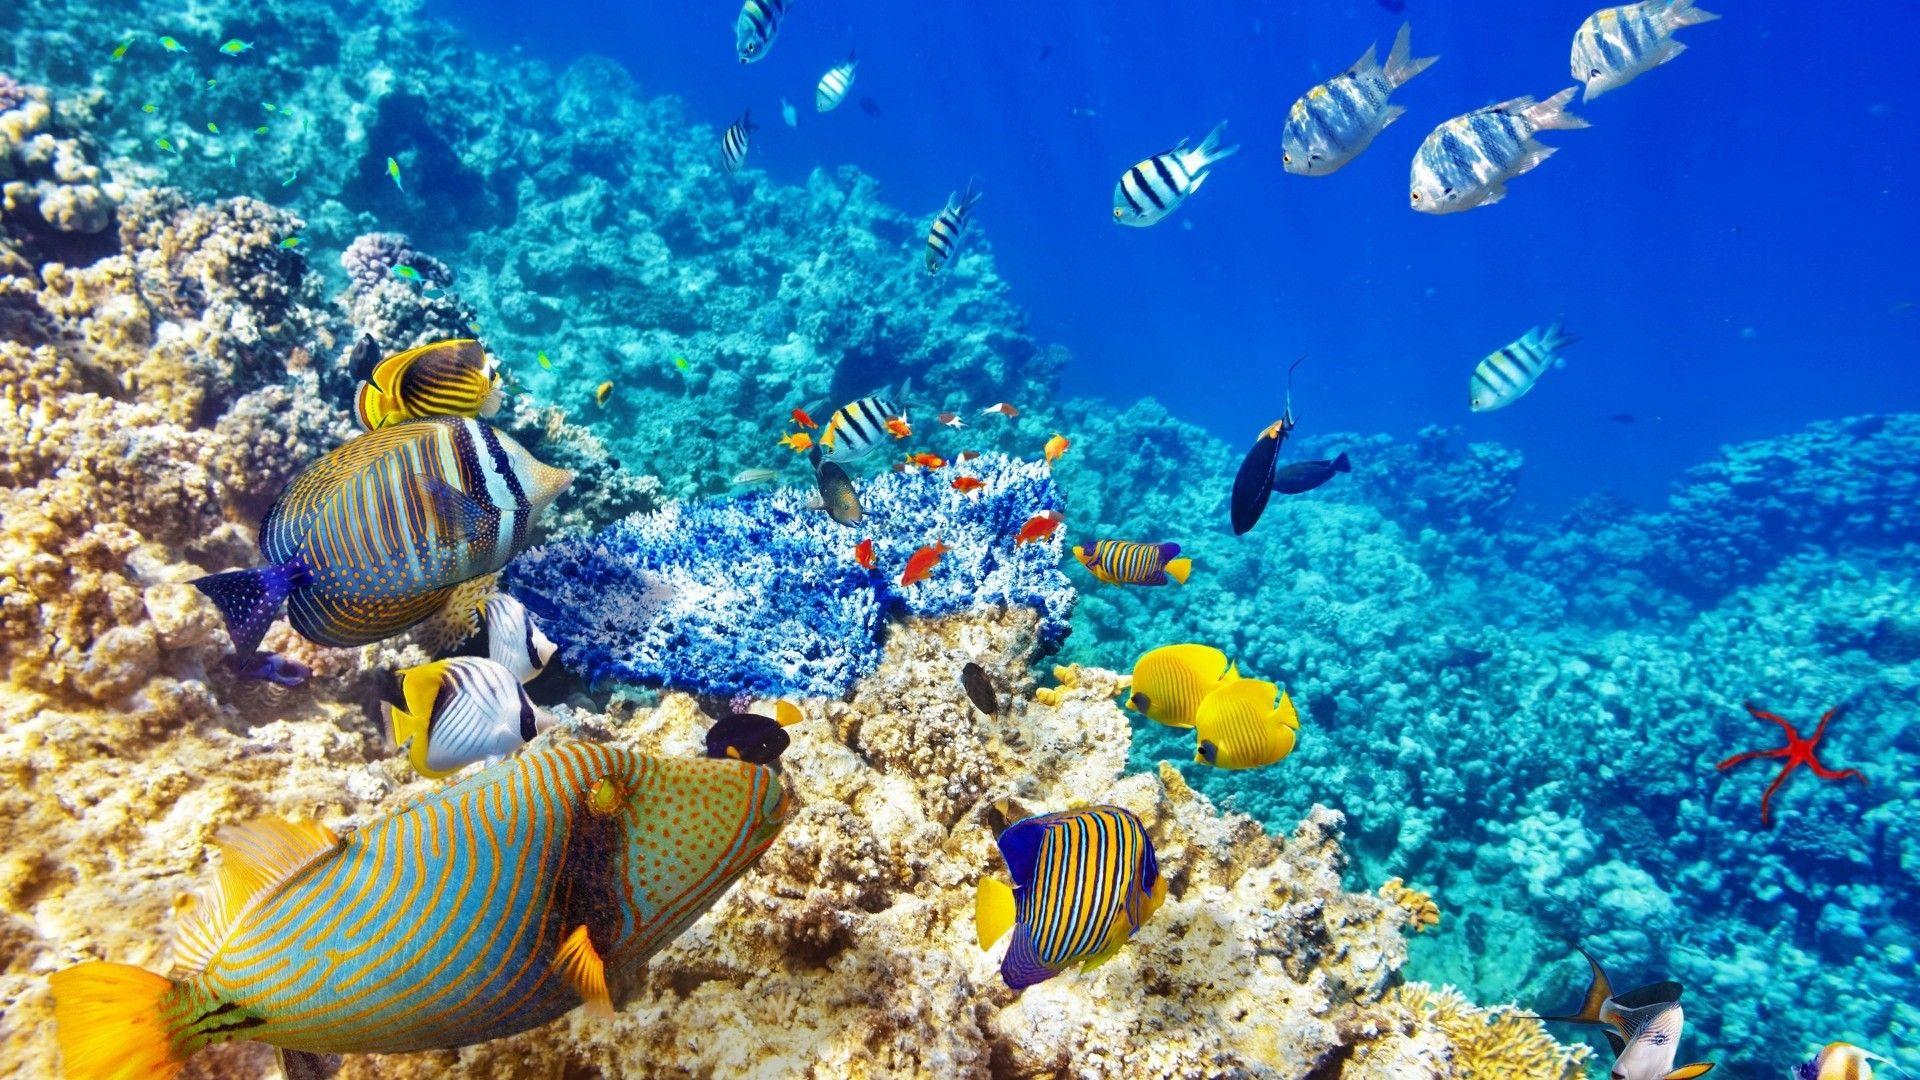 Awesome Colorful Wallpaper Beautiful Coral Reef Pics